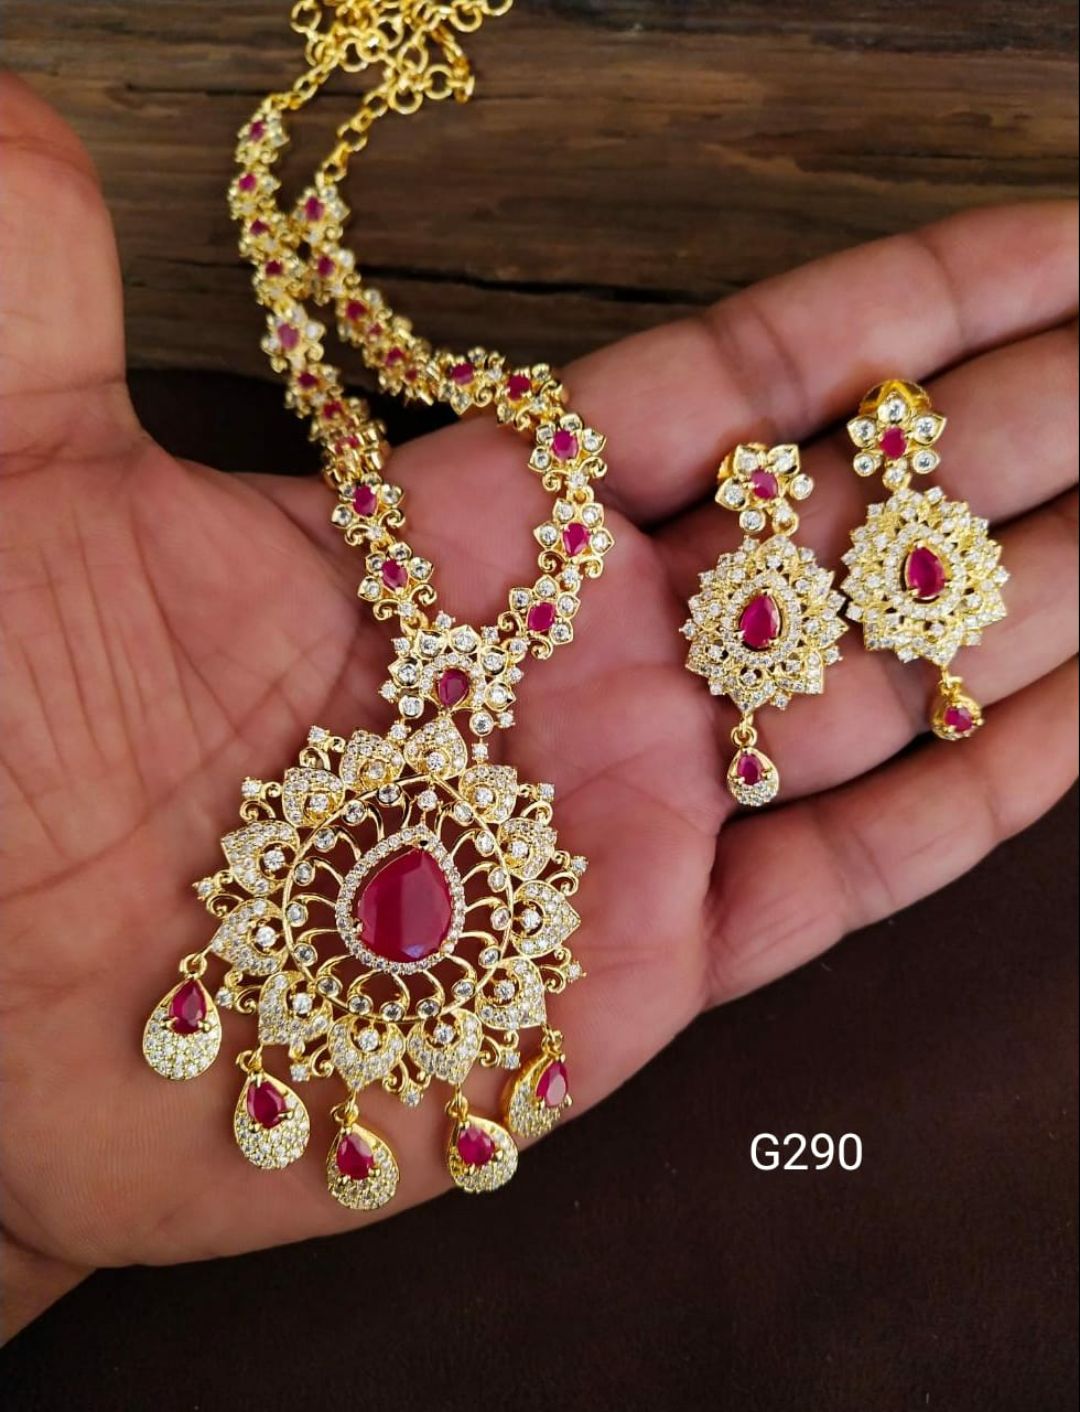 Rama's wardrobe jewellery, sarees and dresses • ShareChat Photos and Videos